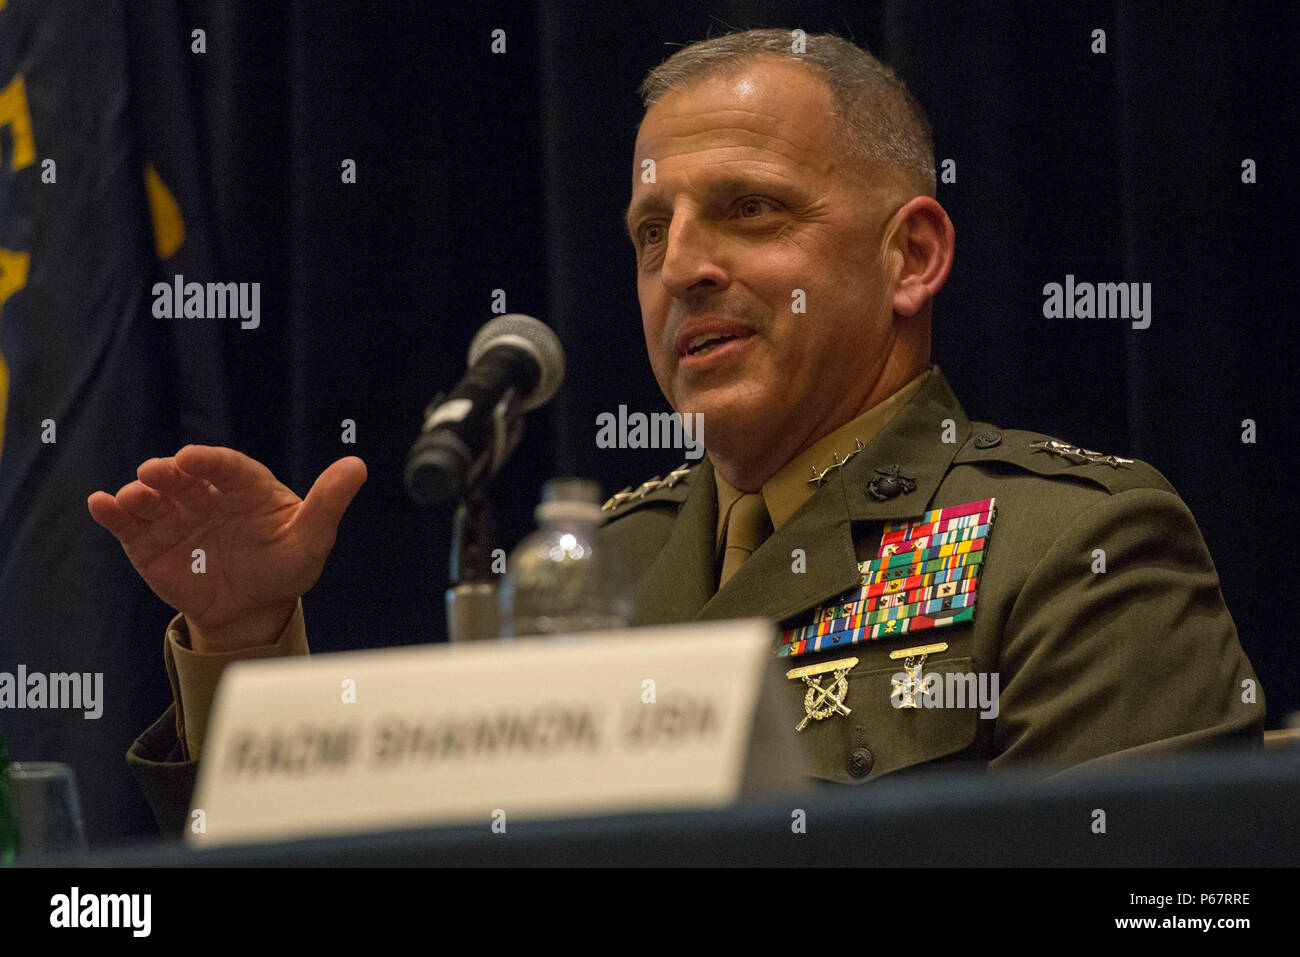 160516-N-XO220-036 NATIONAL HARBOR, Md. (May 16, 2016) – Lt. Gen. Michael Dana, deputy commandant for installations and logistics, speaks during a naval integration roundtable during the 2016 Sea-Air-Space Exposition. The Sea-Air-Space Exposition is an annual event that brings together key military decision makers, the U.S. defense industrial base and private-sector U.S. companies for an innovative and educational maritime based event. (Mass Communication Specialist 3rd Eric S. Brann/Released) Stock Photo